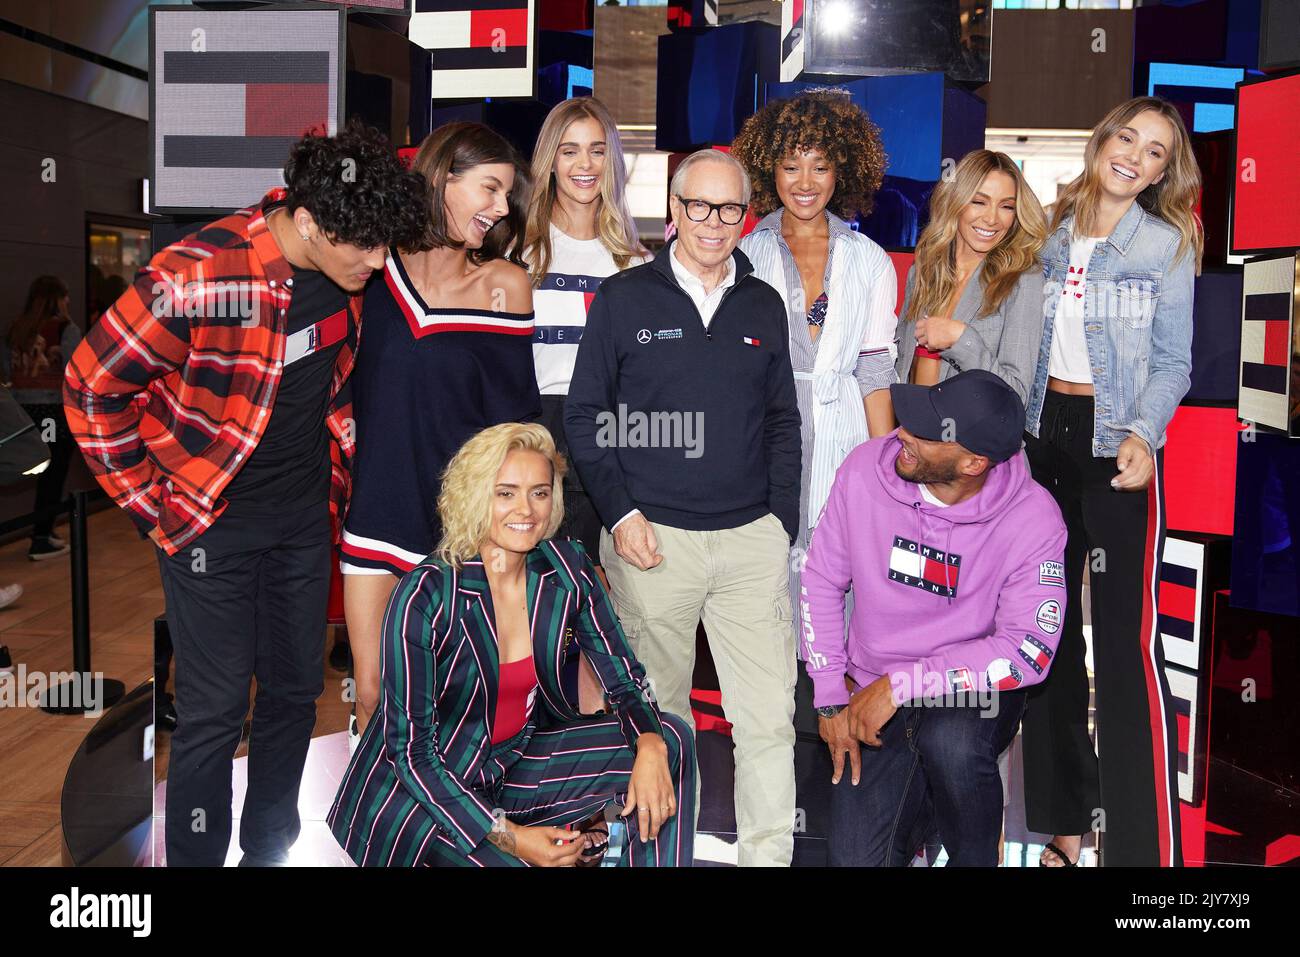 American fashion designer Tommy Hilfiger poses with Denzel, Isabella  Carlstrom, Moana Hope, Brooke Hogan, Nadia Bartel, Josh Gibson and fashion  models during an event at the Emporium in Melbourne, Friday, November 15,